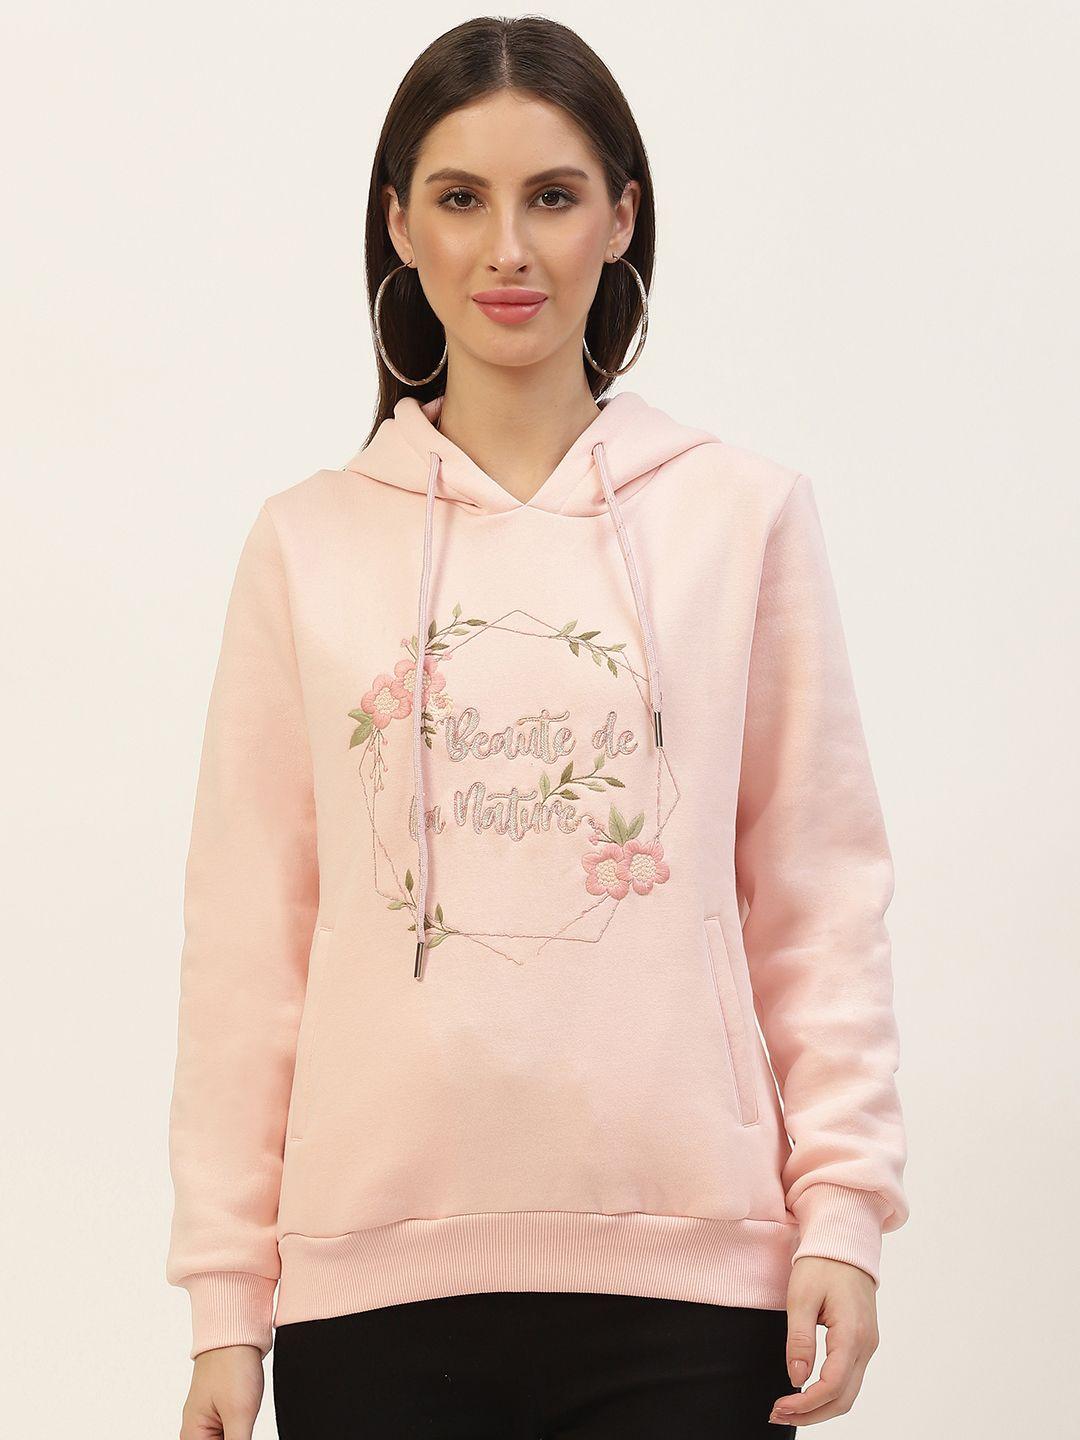 monte carlo women peach-coloured embroidered hooded sweatshirt